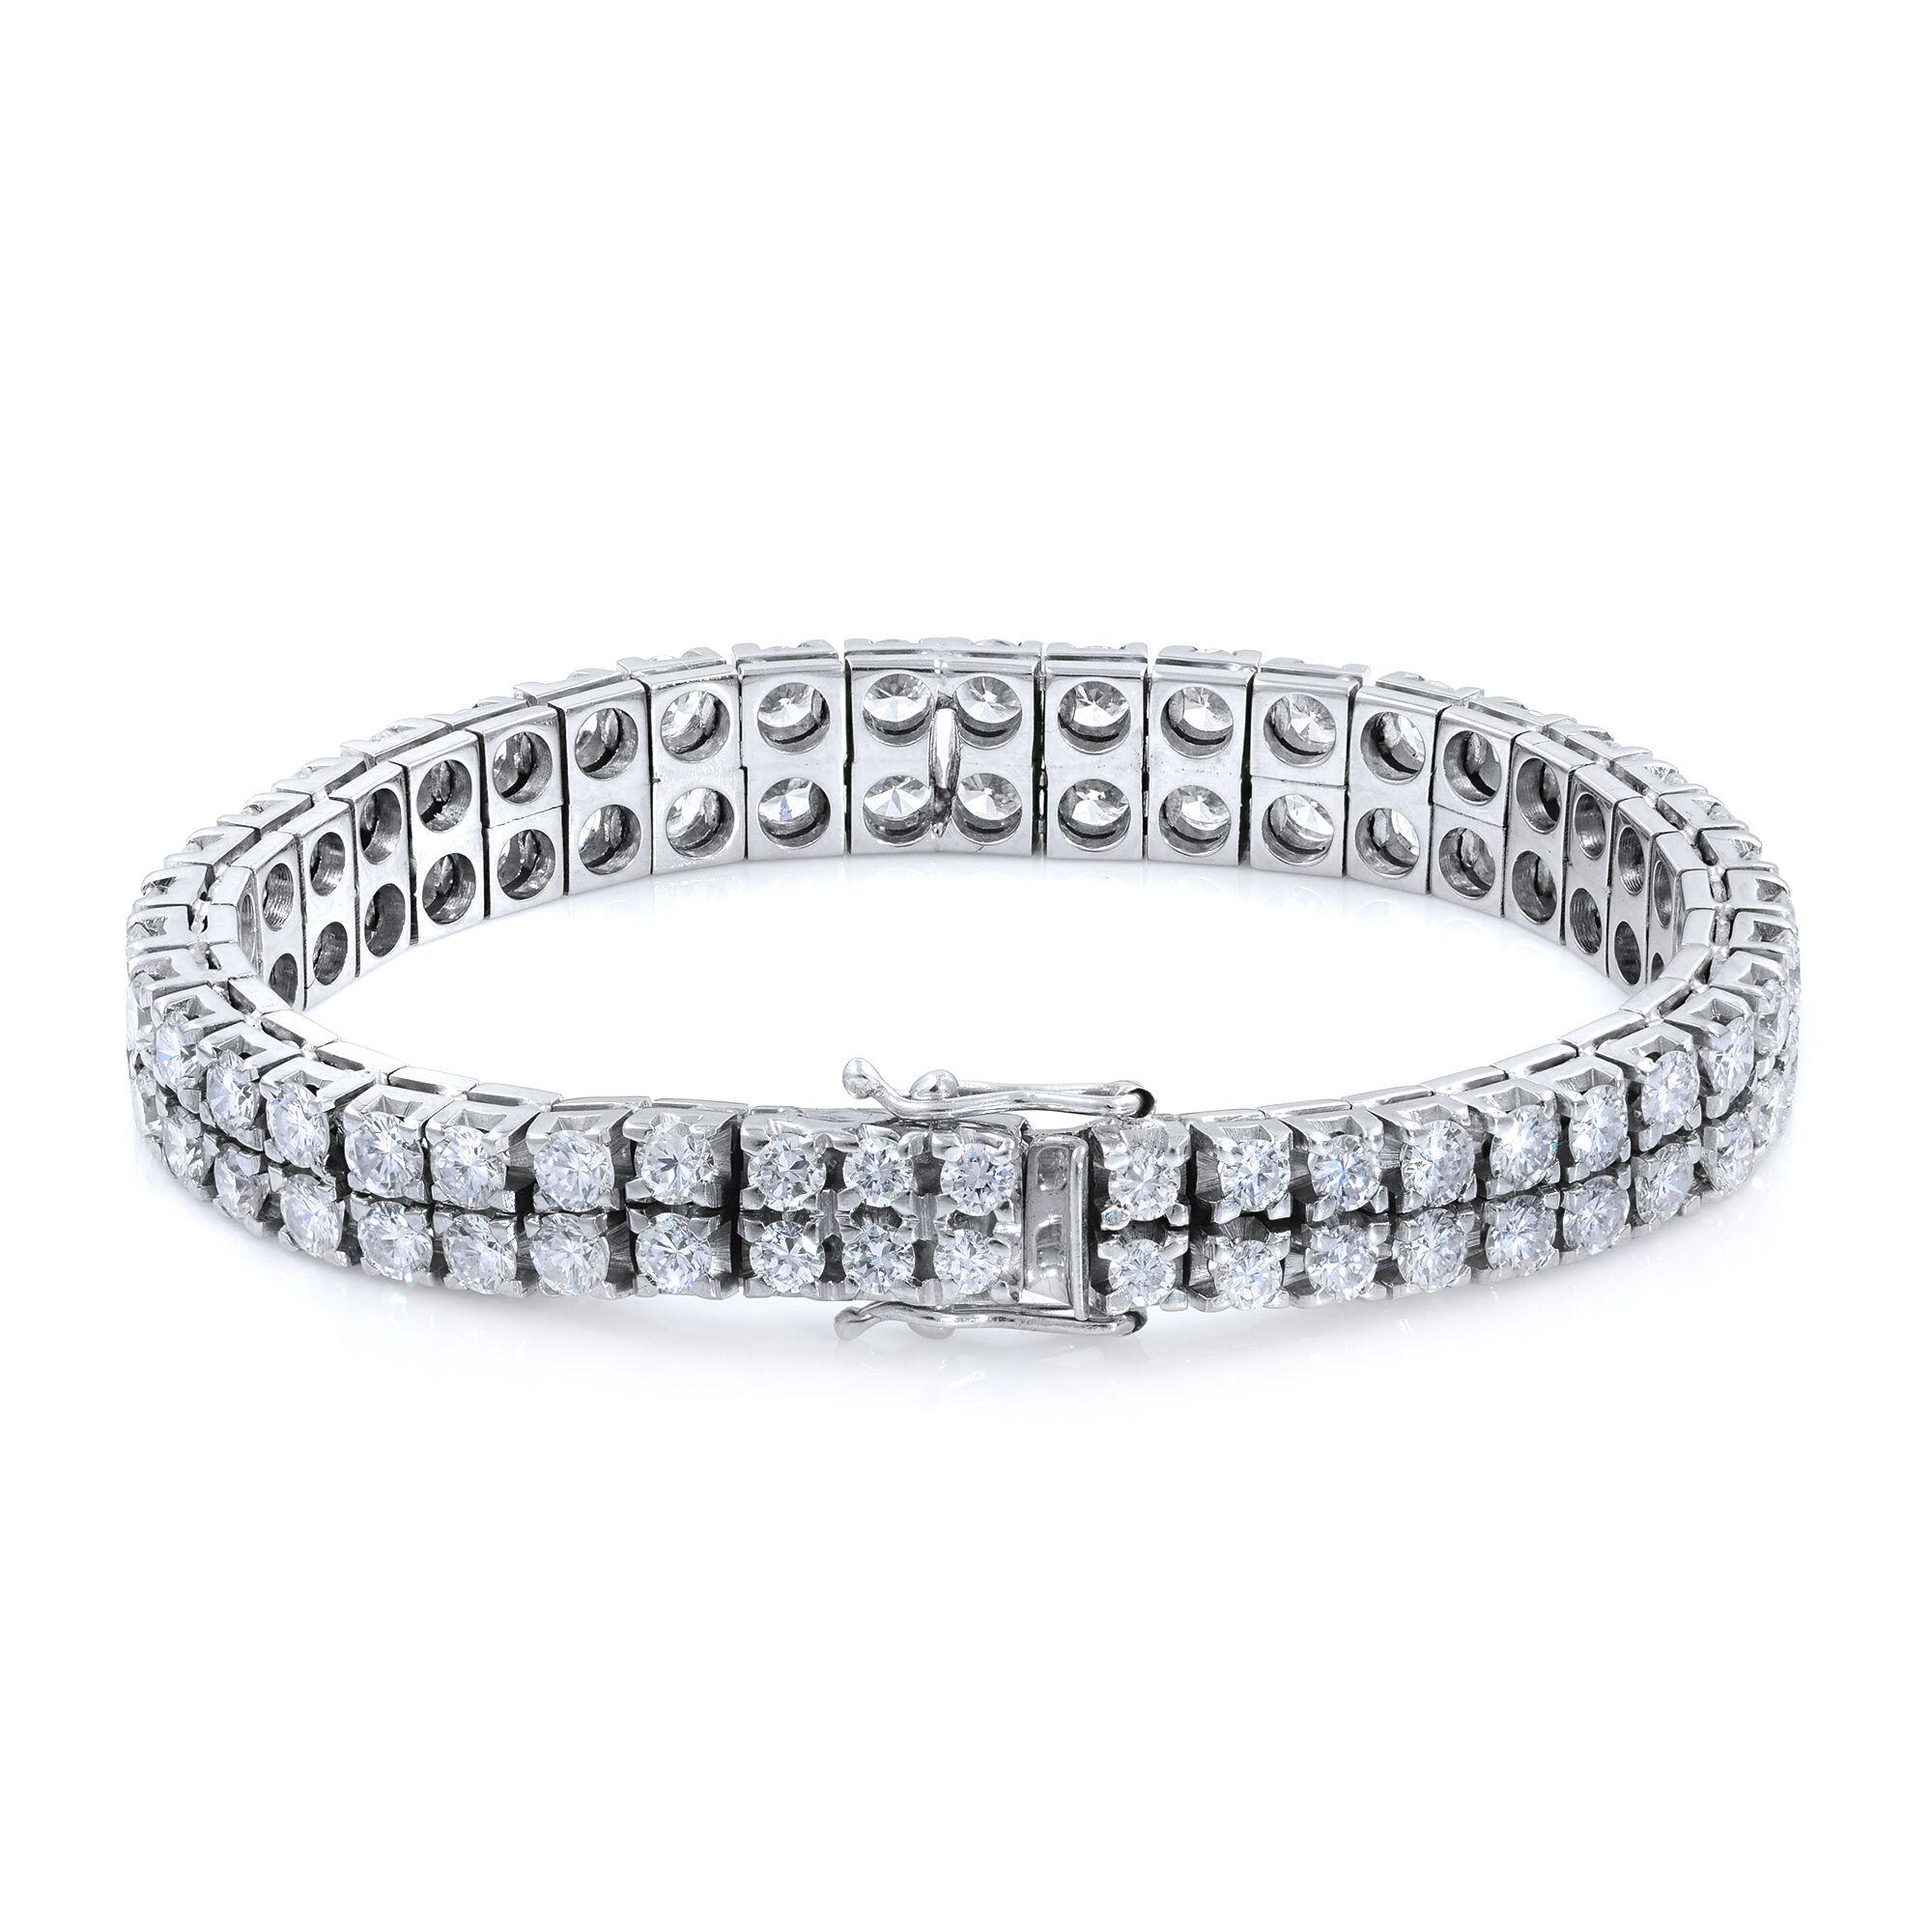 Our glamorous 14k white gold prong setting diamond tennis bracelet features two rows of round diamonds totaling 11 carats, 86 stones all together. The diamonds possesses the clarity and color of H and VS. If a line of sparkling round diamonds inst